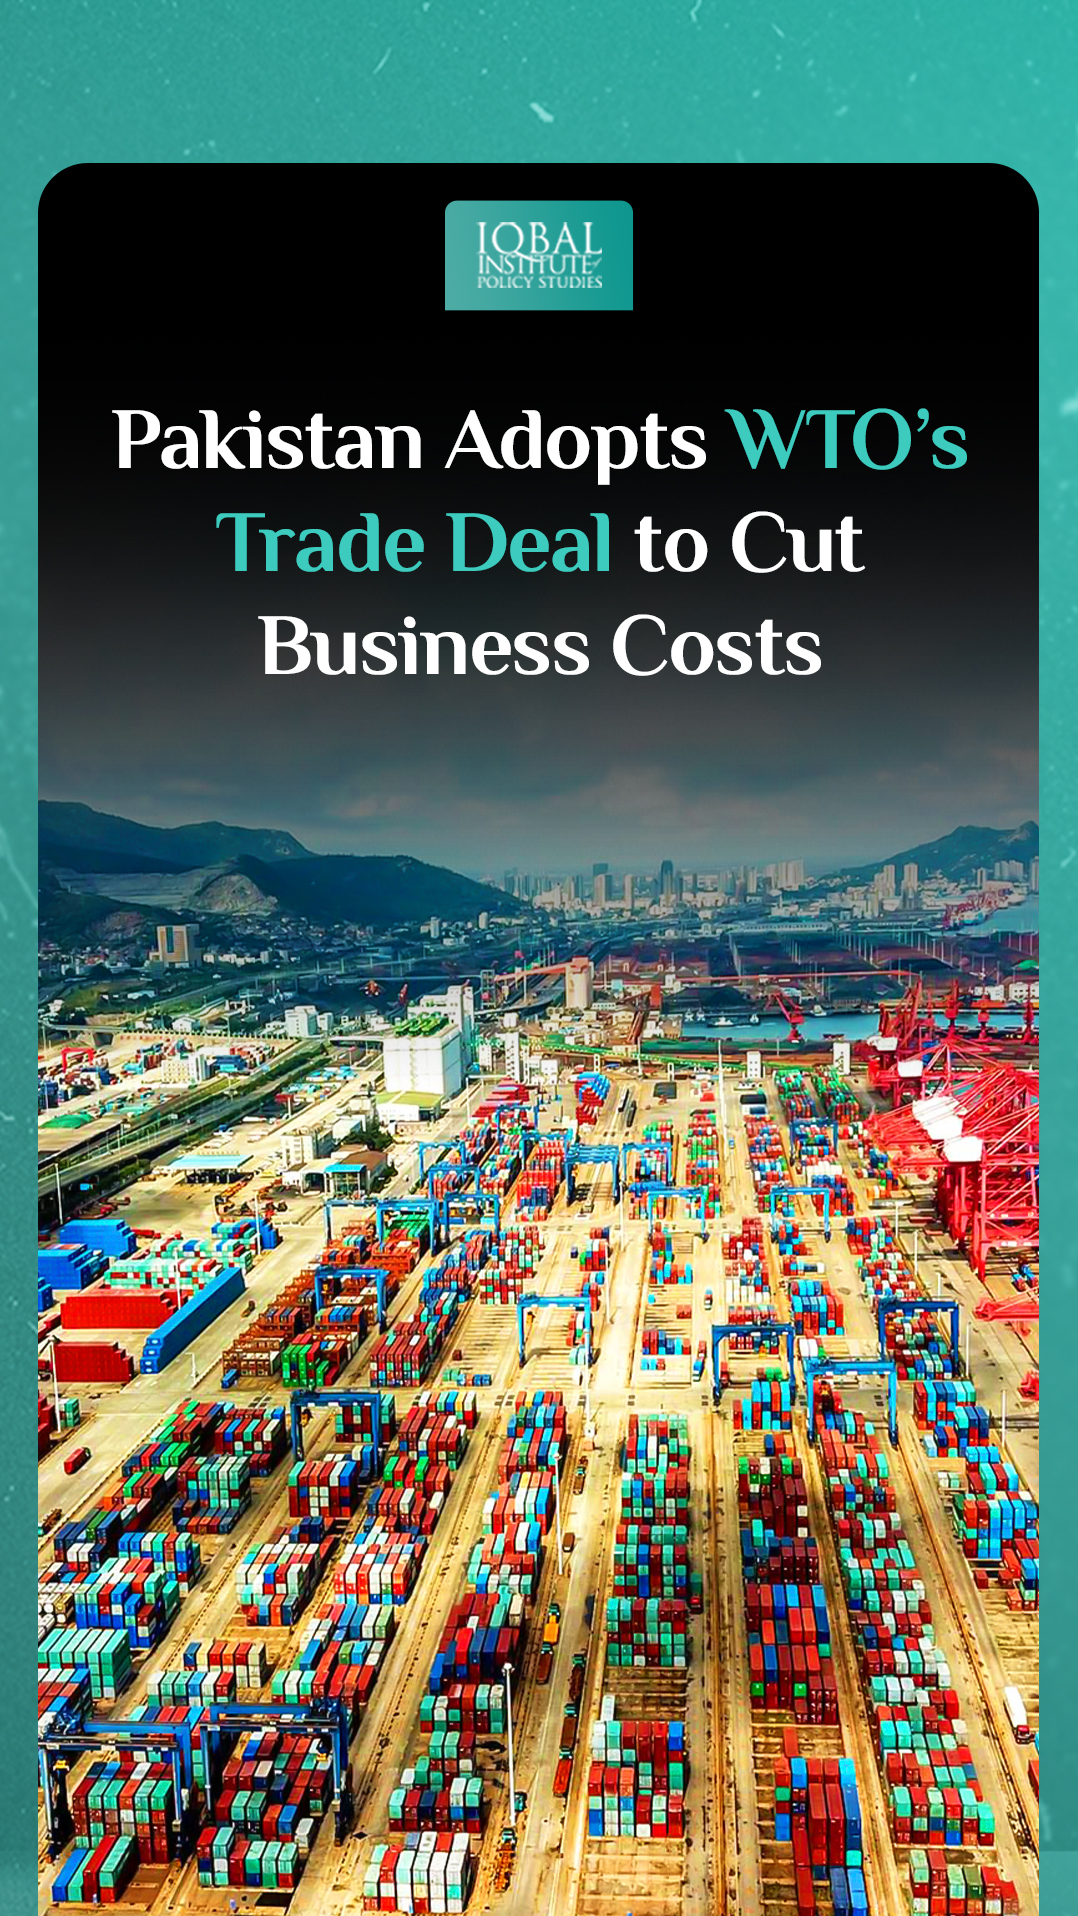 Pakistan to Adopt WTO's Trade Deal to Cut Business Costs